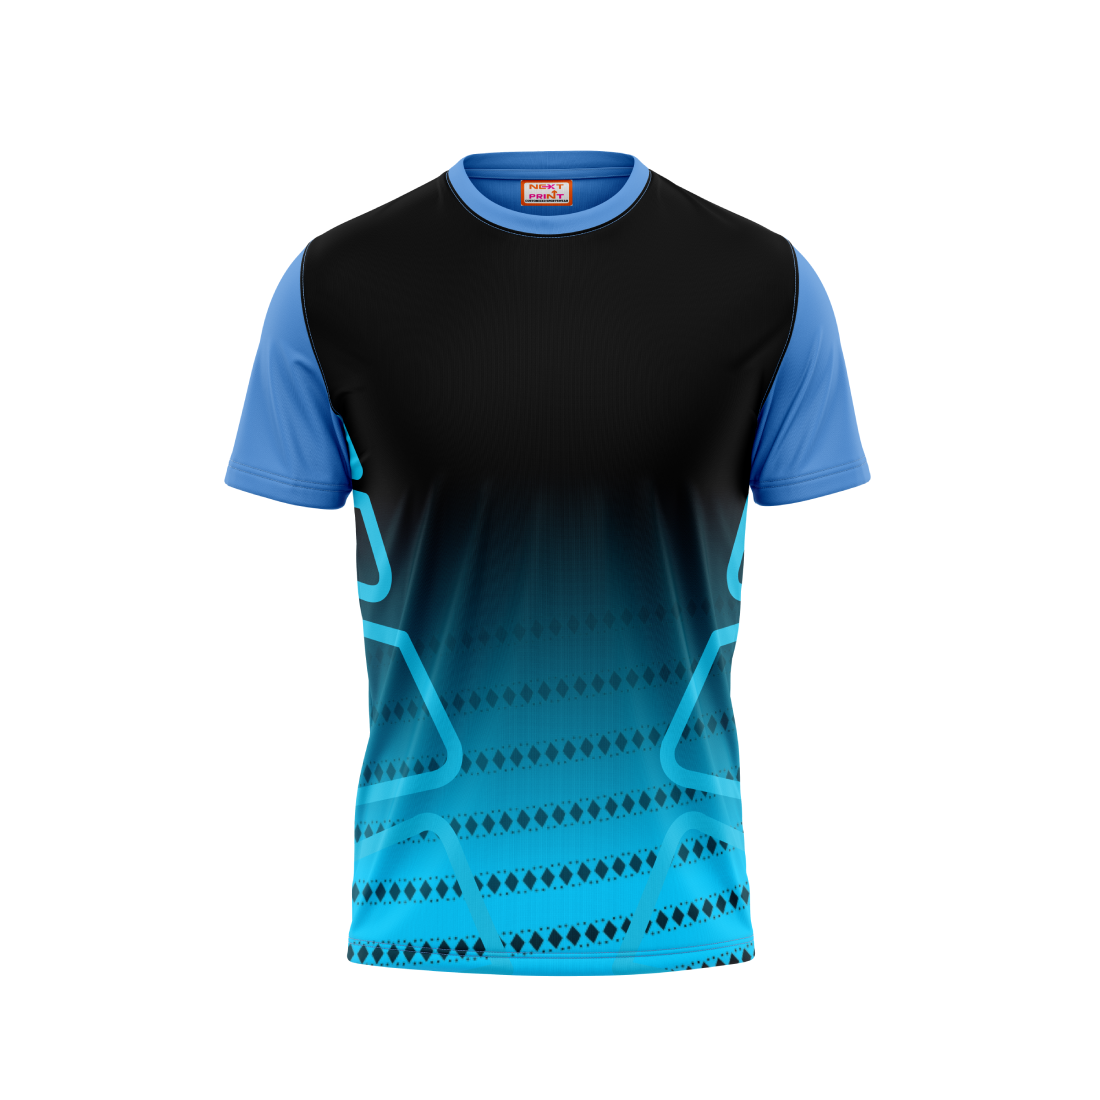 Round Neck Printed Jersey Skyblue NP0050